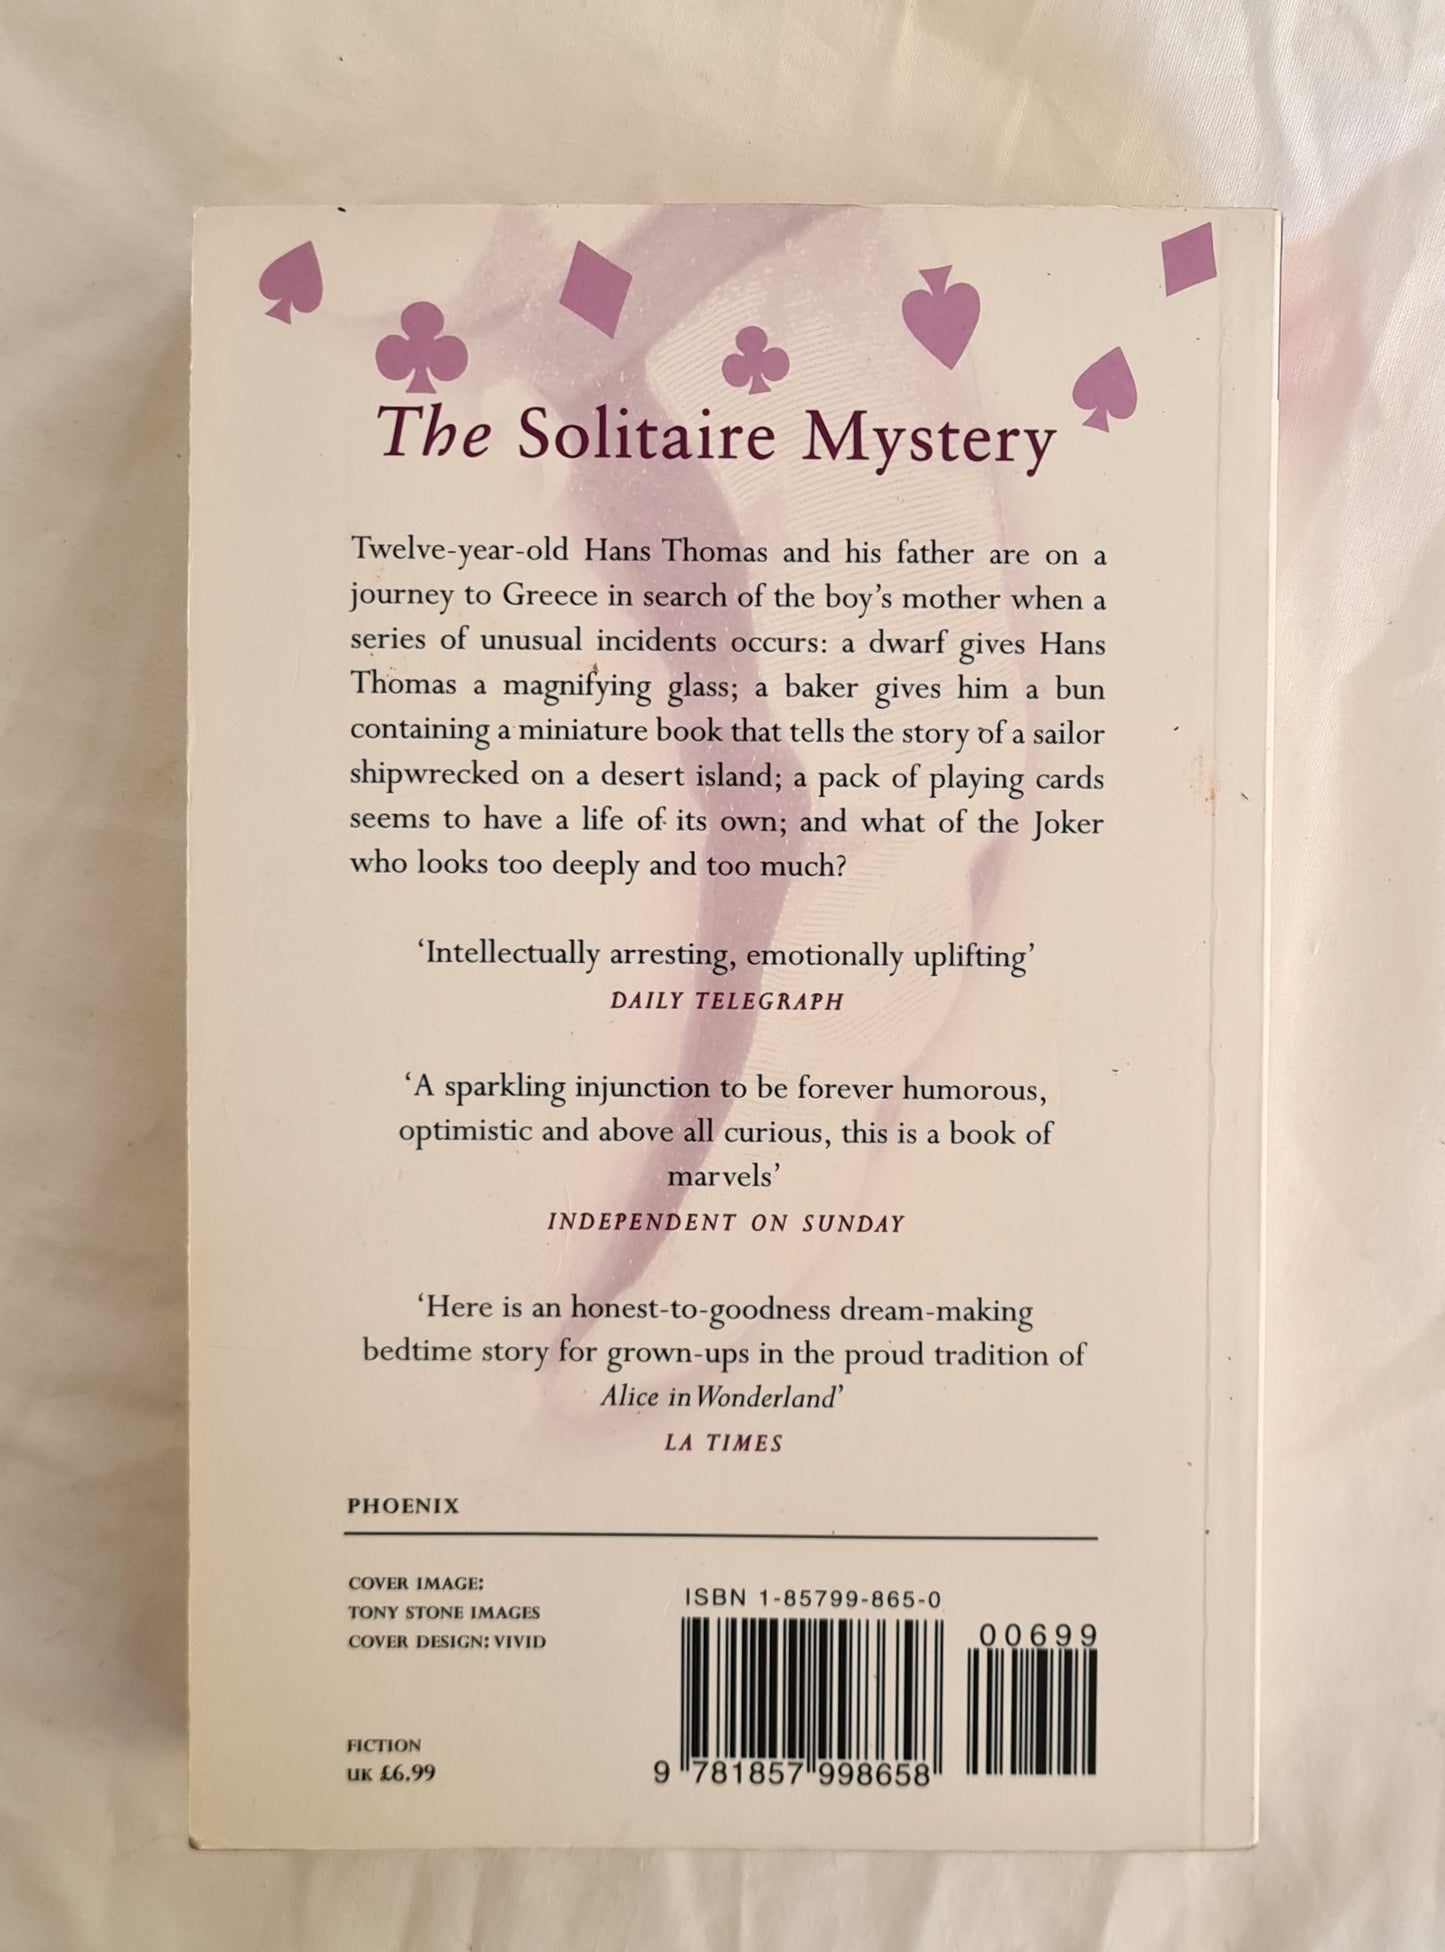 The Solitaire Mystery by Jostein Gaarder